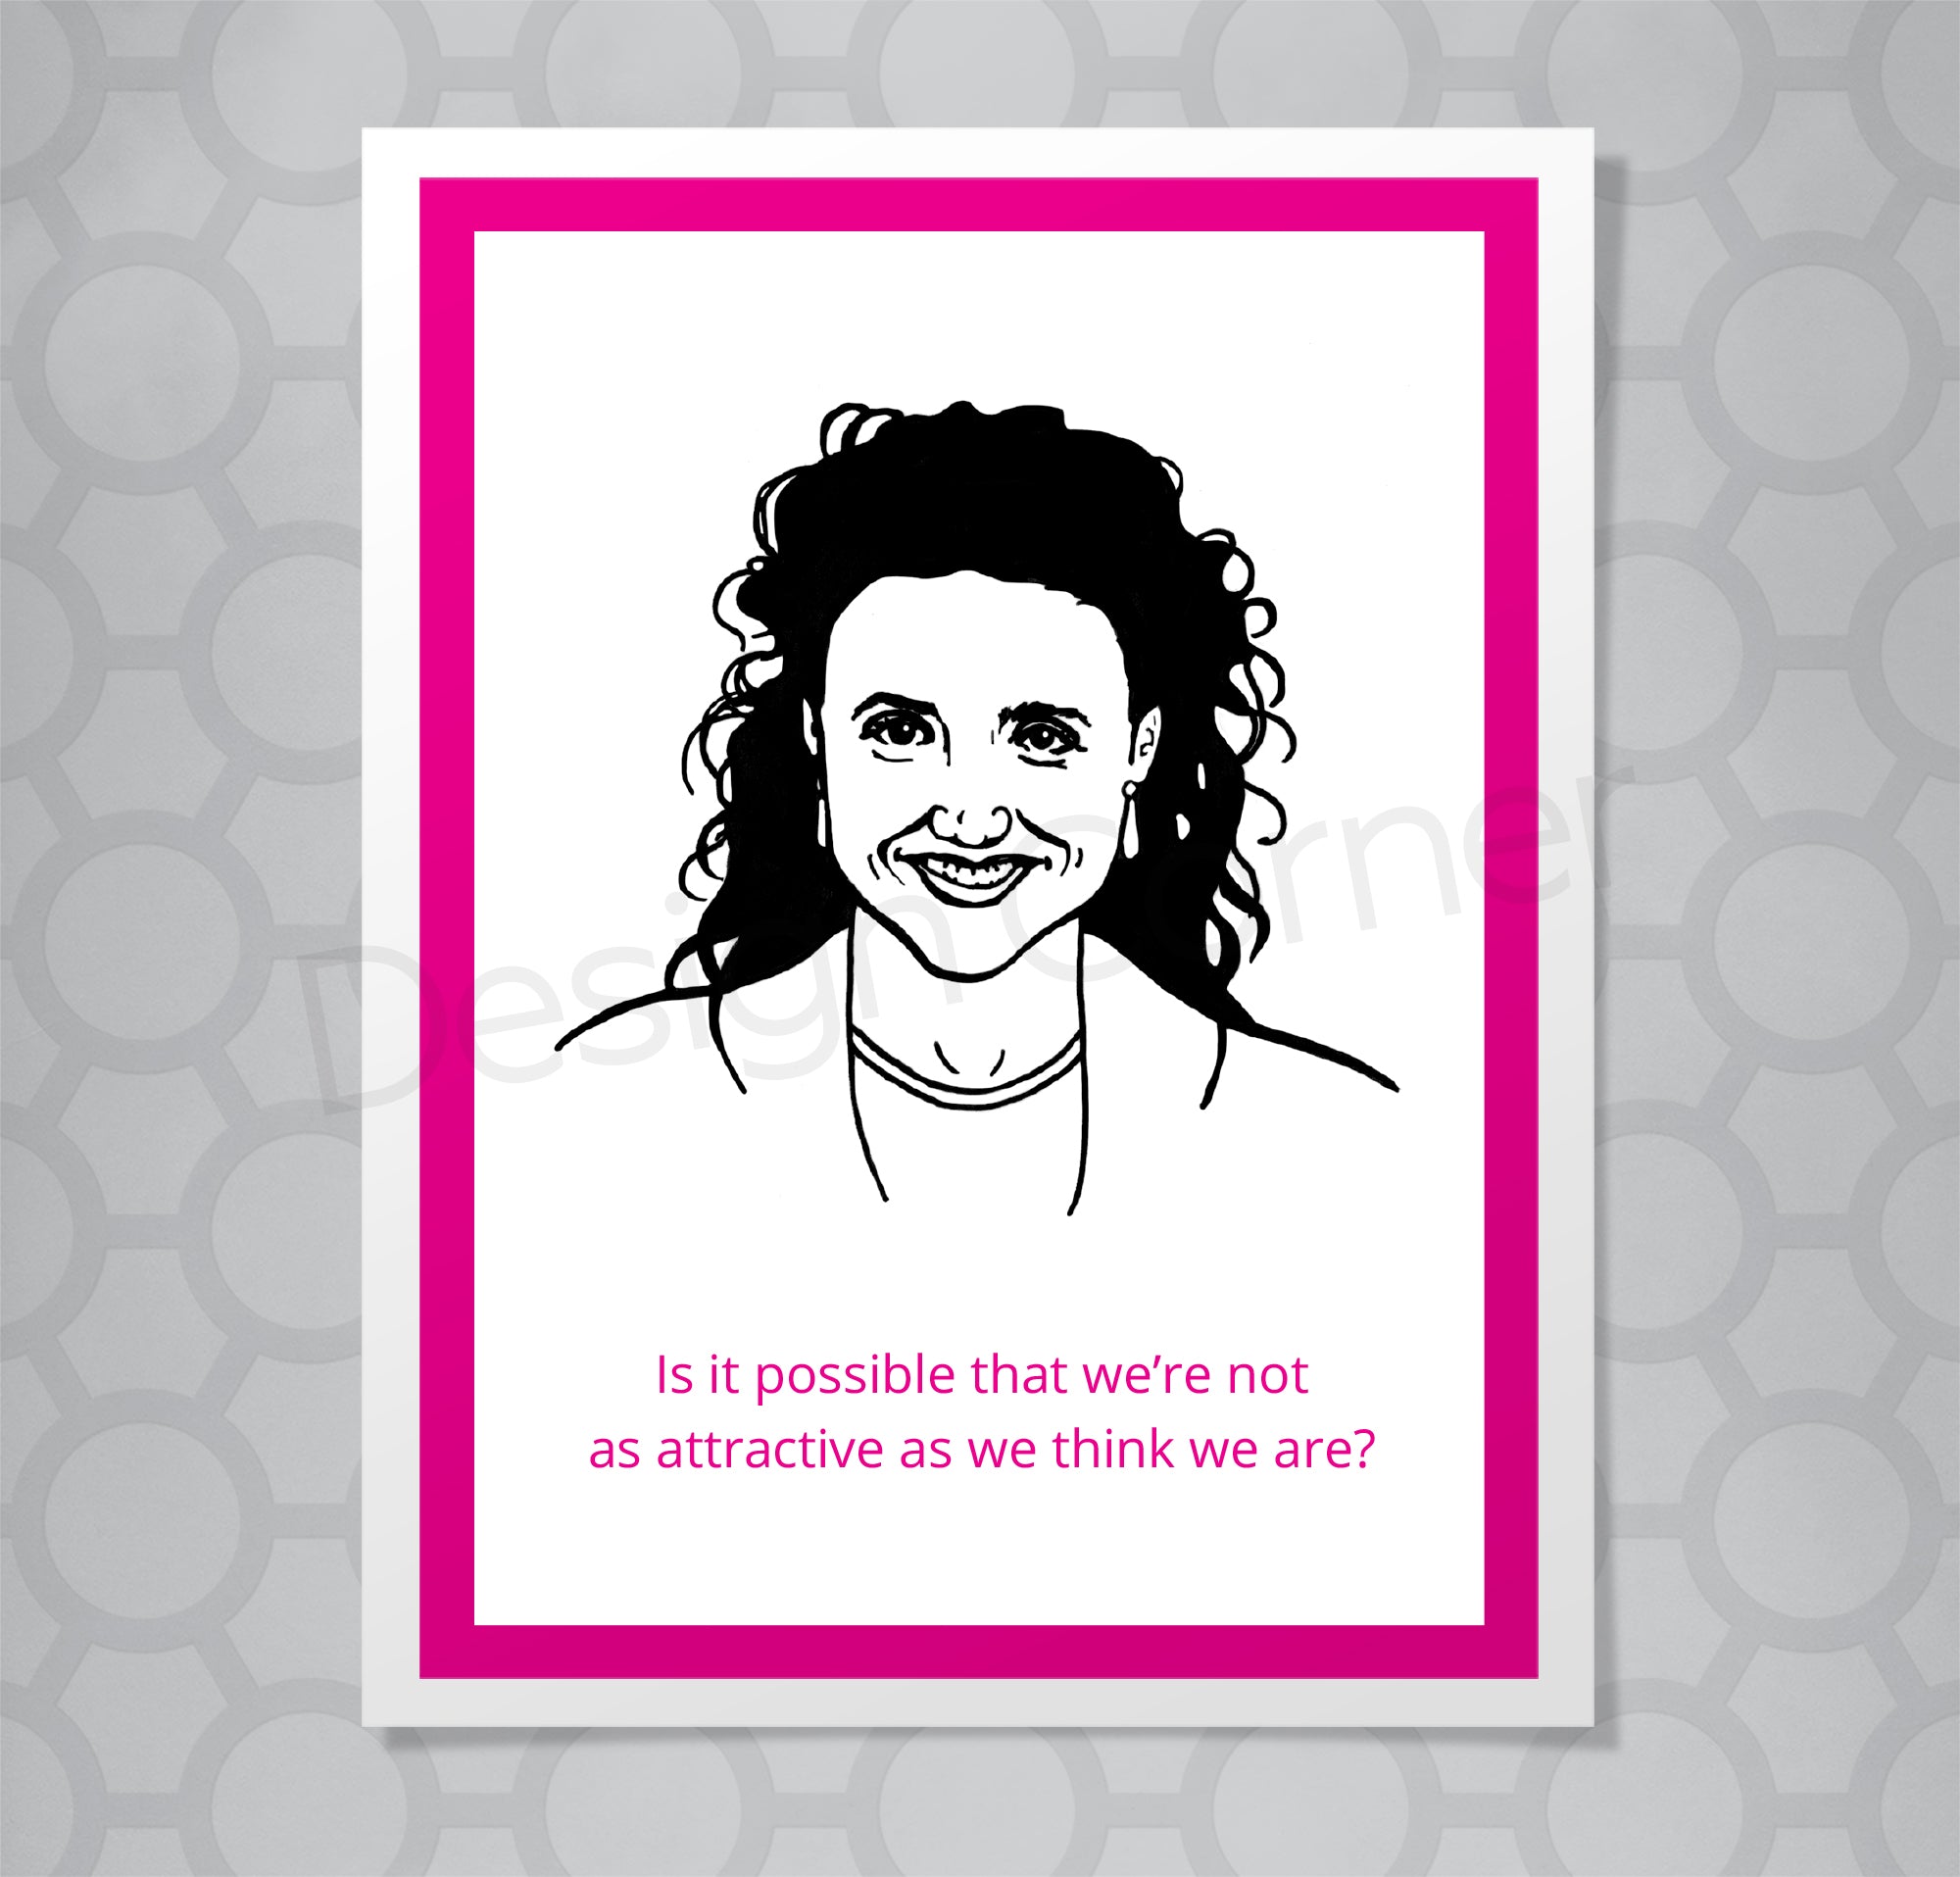 Greeting card with illustration of Seinfeld's Elaine. Caption says "Is it possible that we may not be as attractive as we think we are?"